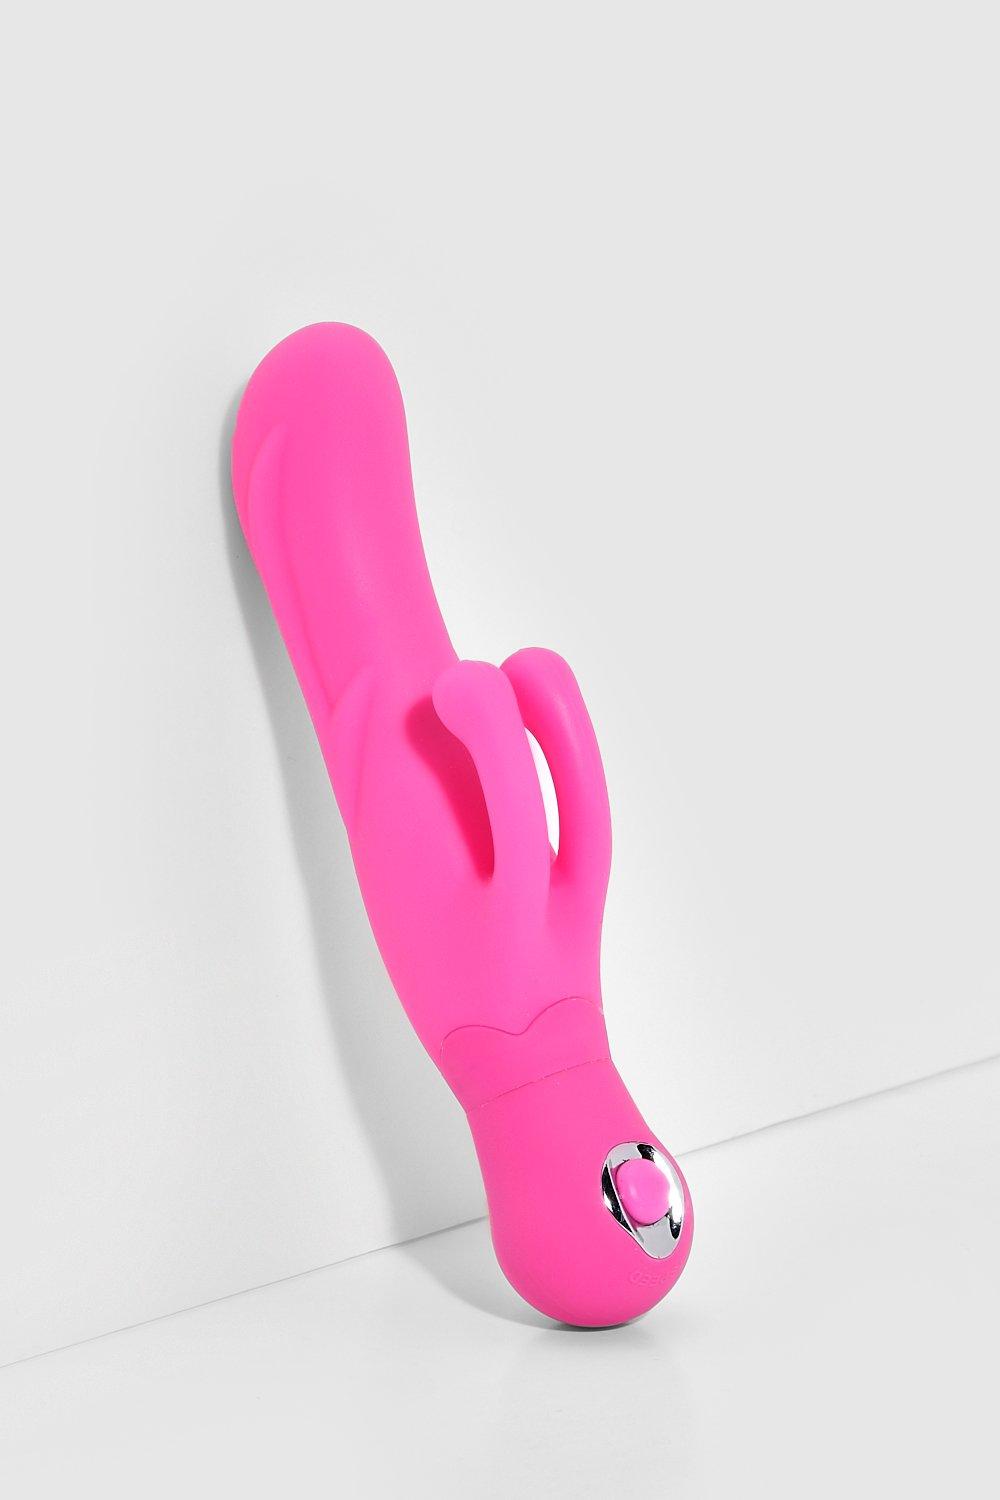 Image of Womens Double Dancer Vibrator - Pink - One Size, Pink